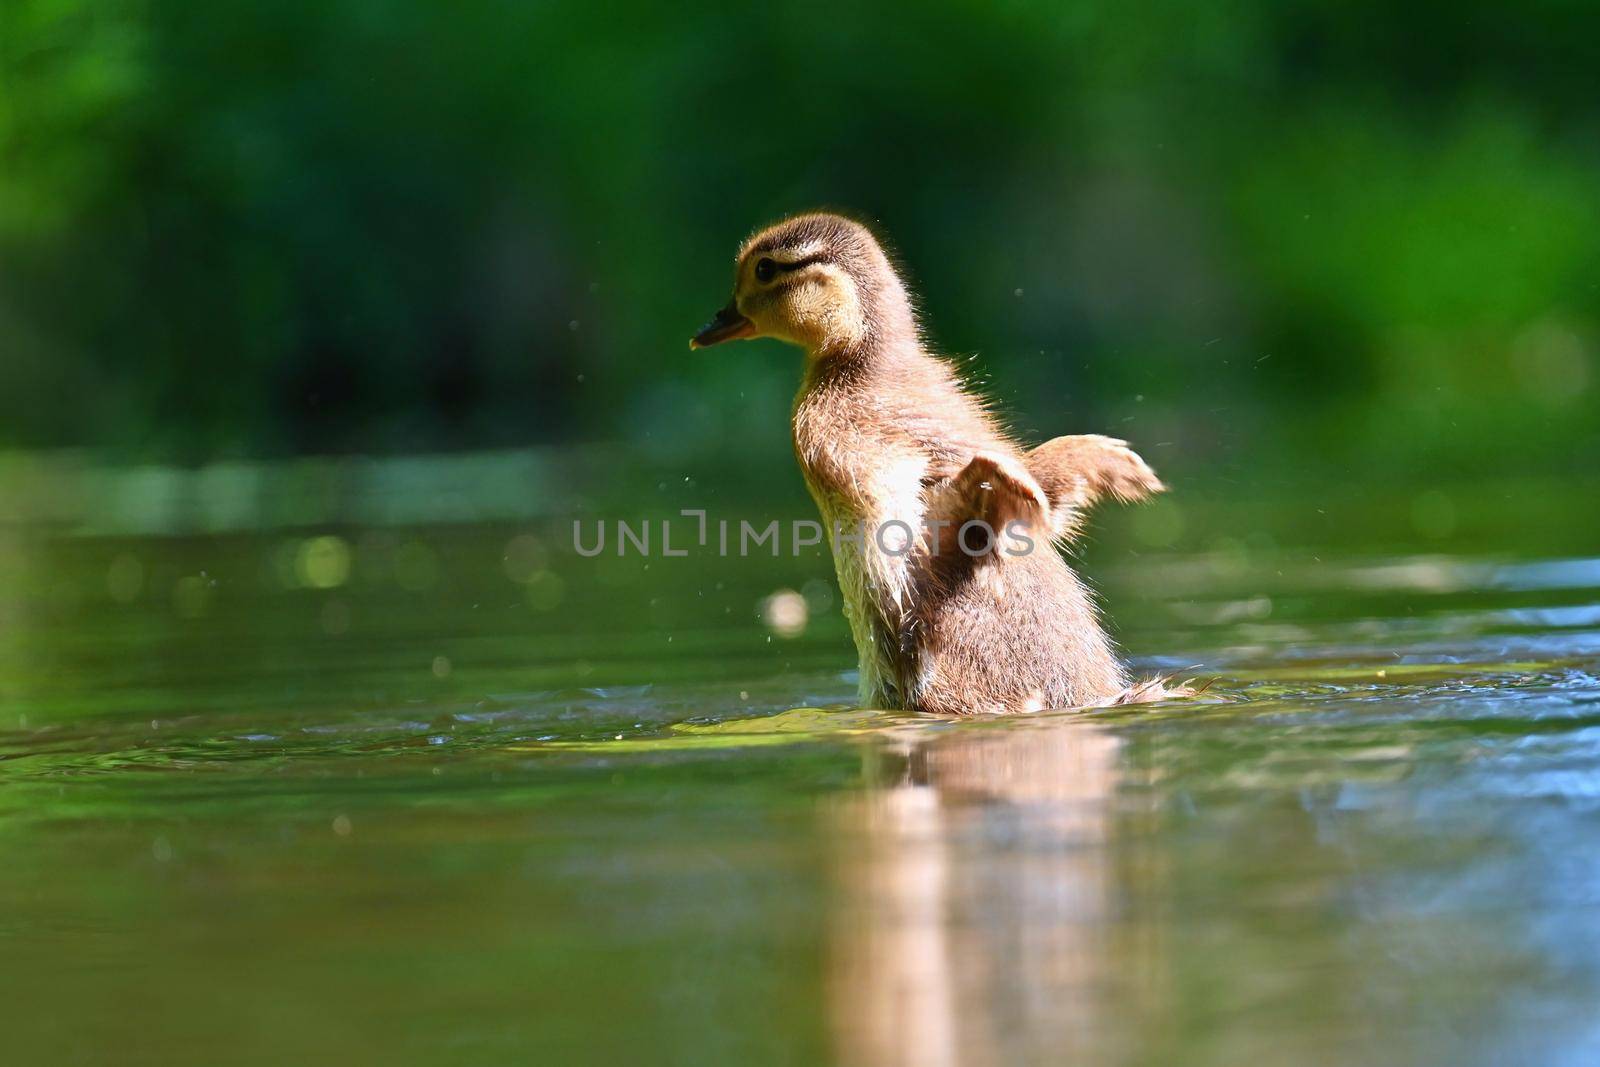 Duckling. Mandarin duckling cub. Beautiful young water bird in the wild. Colorful background.